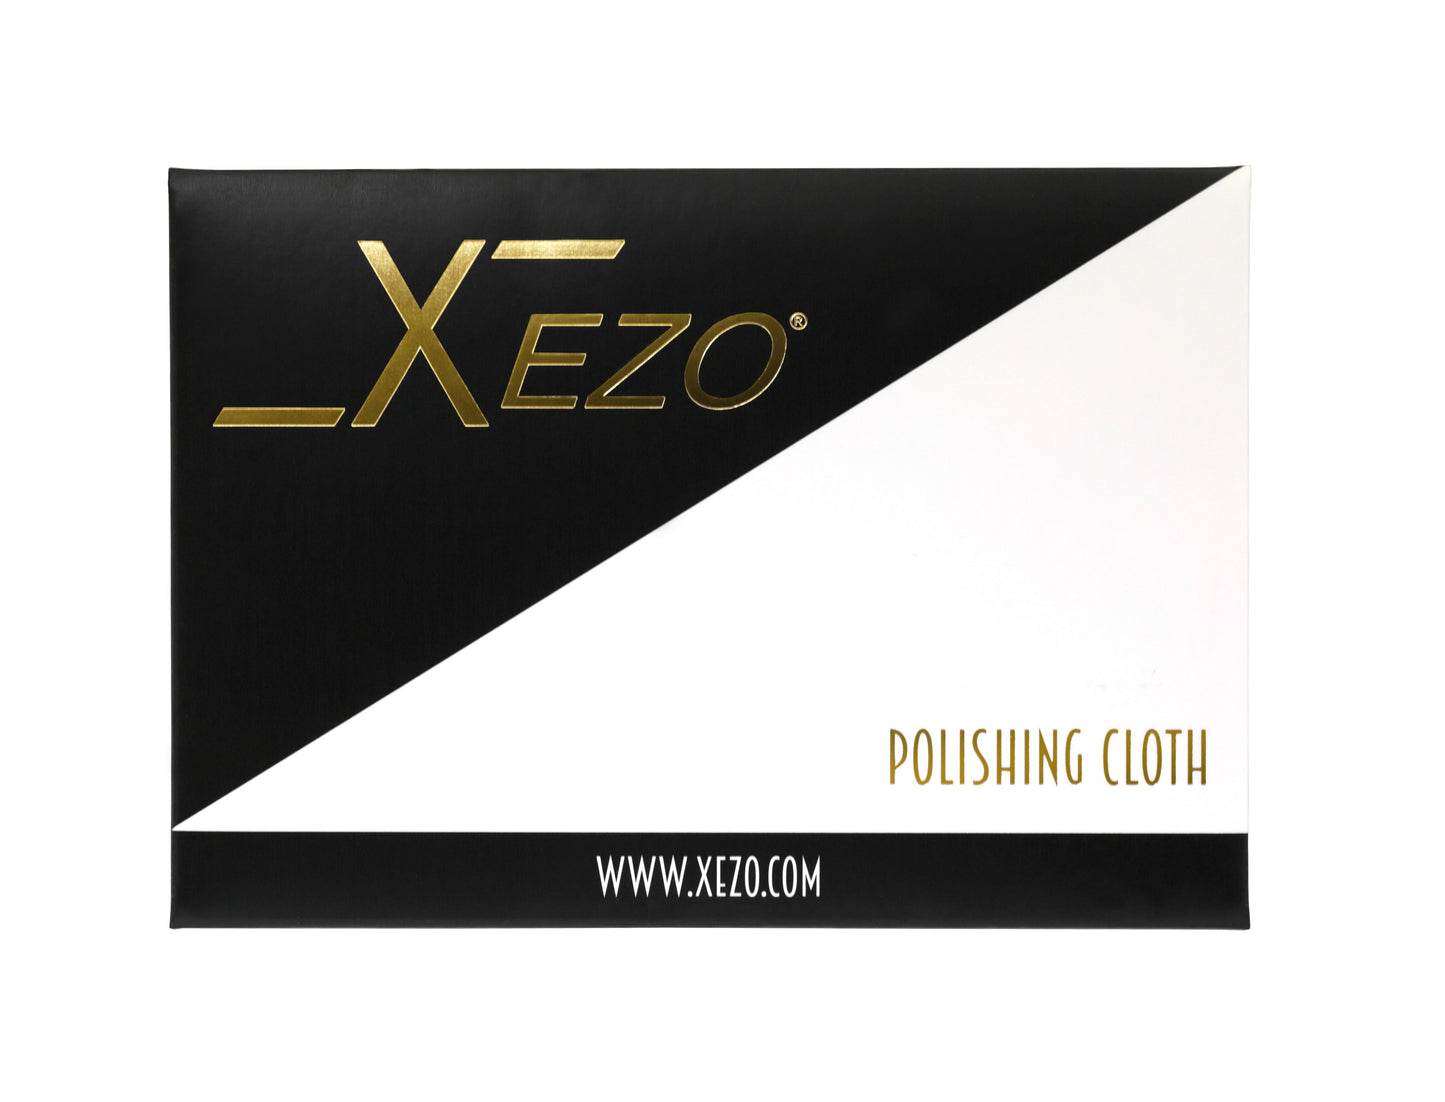 Xezo - The packaging for the sterling silver and gold polishing cloth